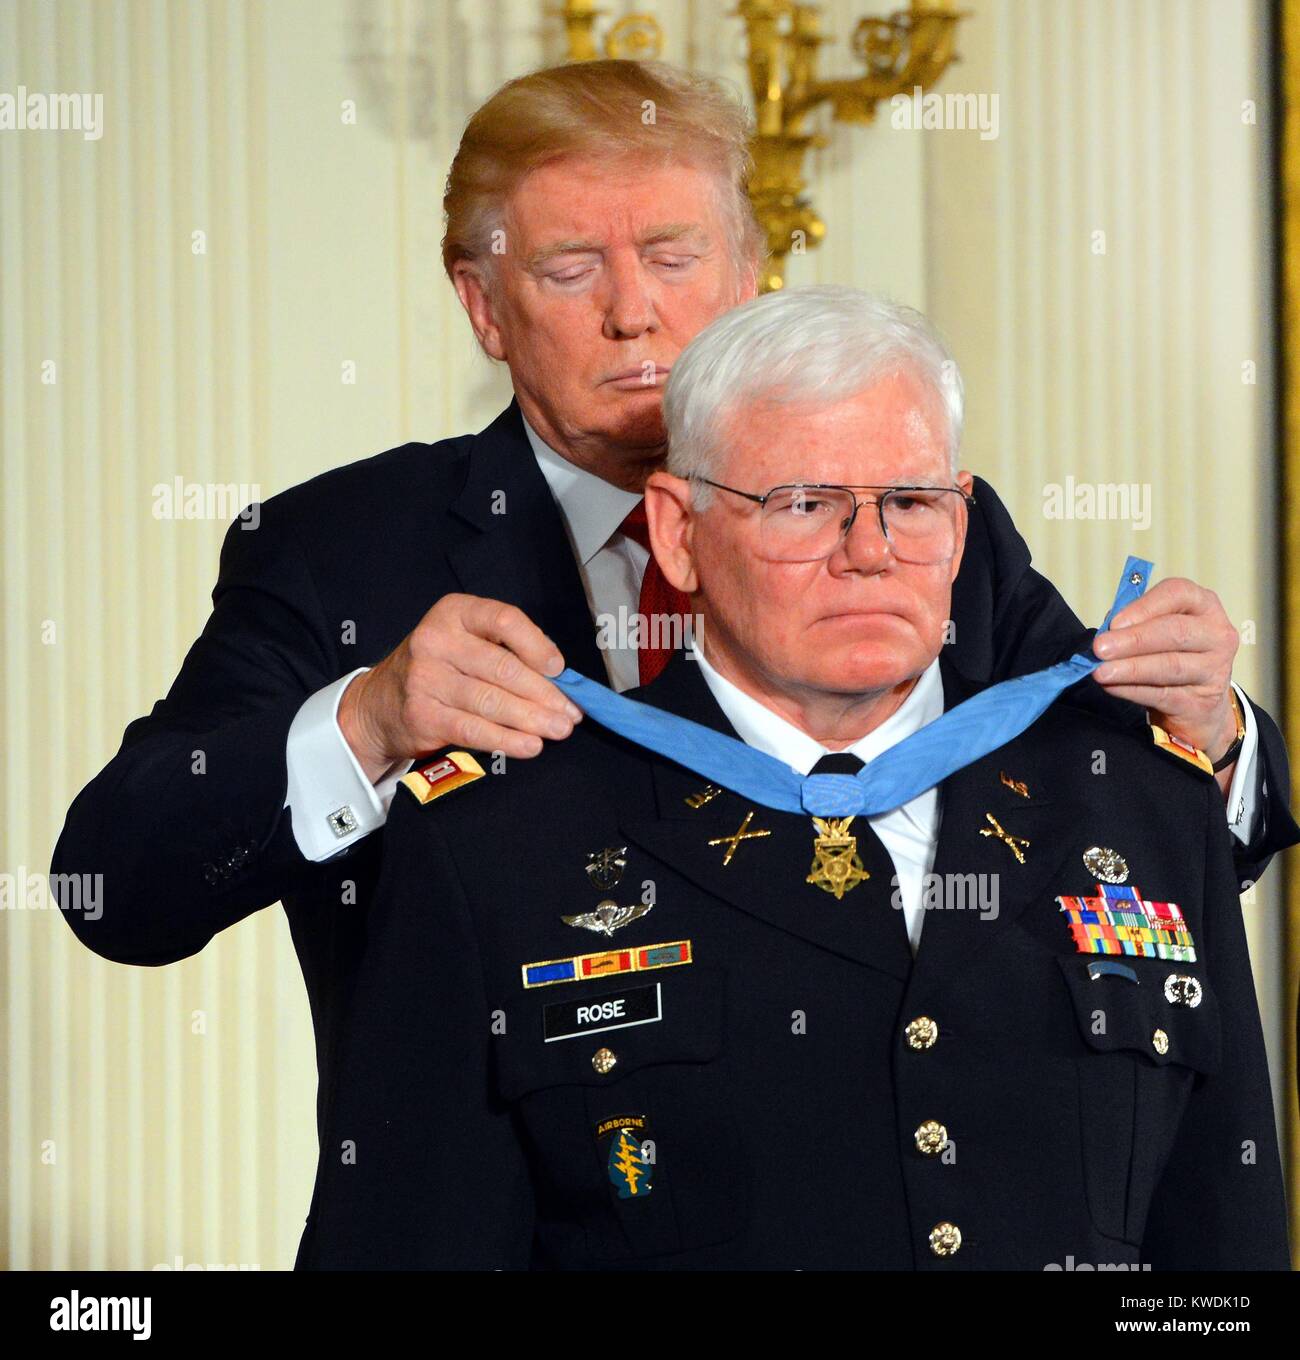 Army Capt. Mike Rose receives the Medal of Honor from President Donald Trump, Oct. 23, 2017. He was awarded for his heroism as a Special Forces Medic, during the Vietnam War, Sept. 11-14, 1970 (BSLOC 2017 18 148) Stock Photo